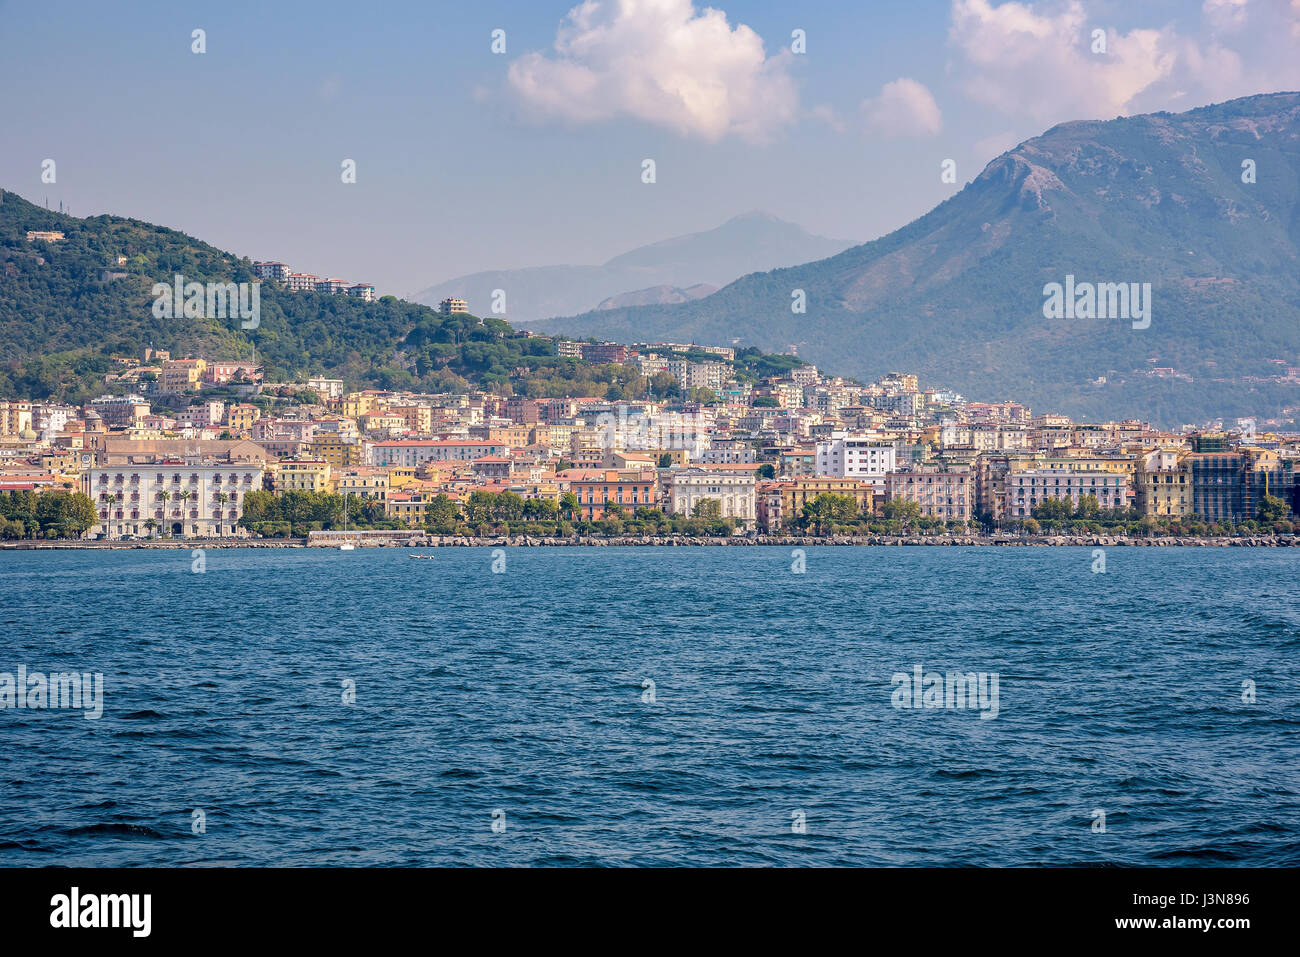 Colorful buildings in the city of Salerno seen from the sea, Campania, Italy Stock Photo